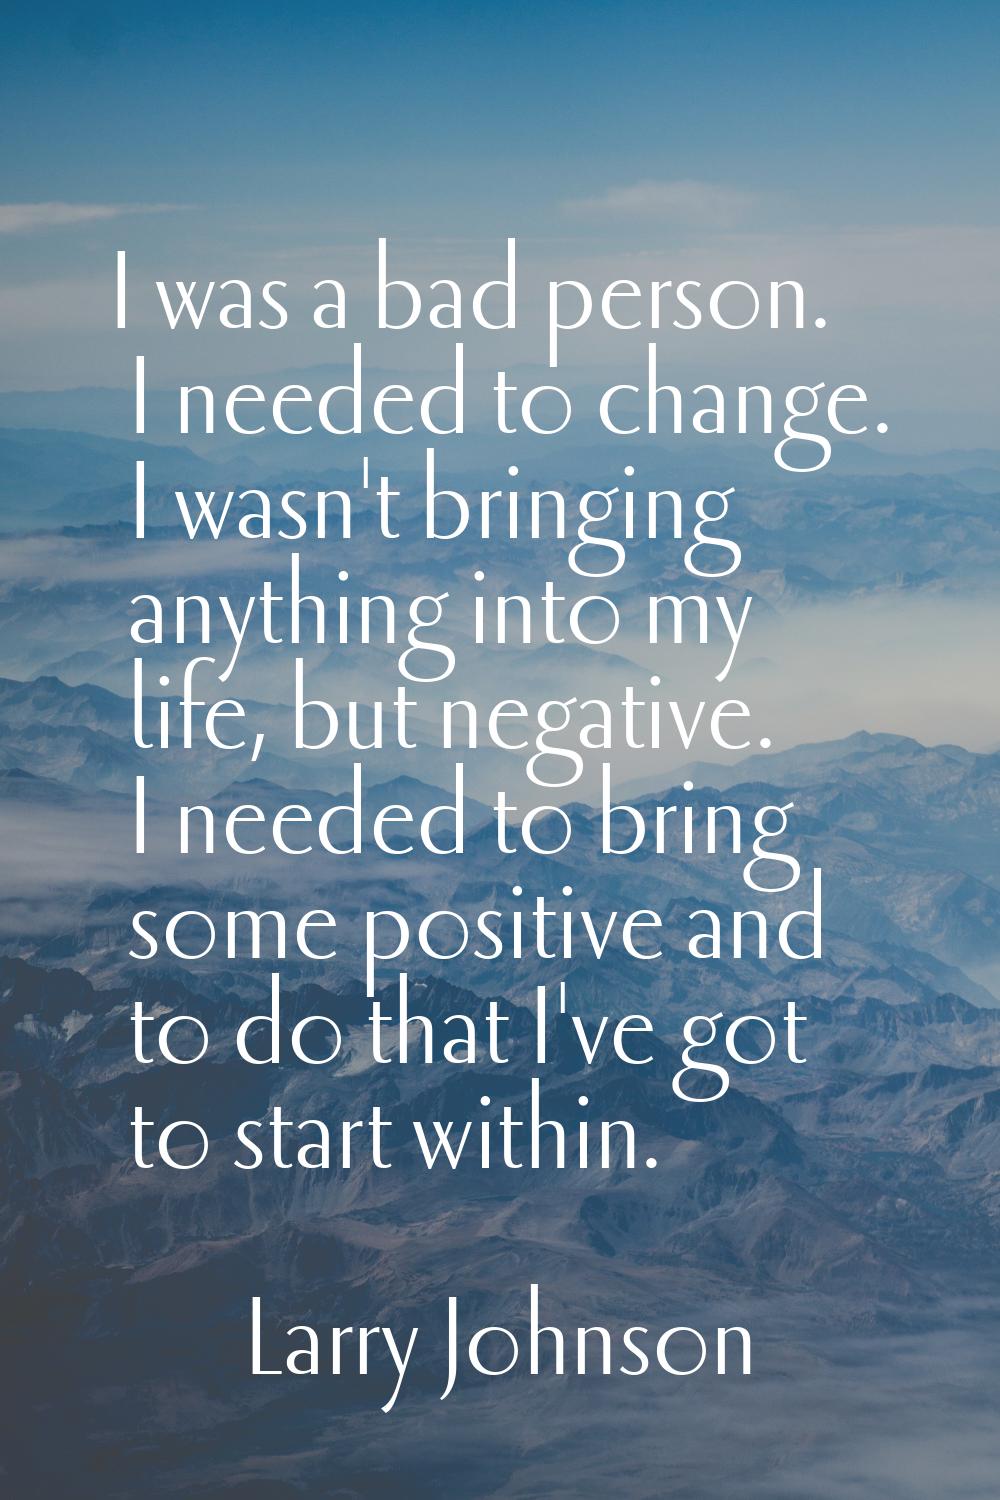 I was a bad person. I needed to change. I wasn't bringing anything into my life, but negative. I ne